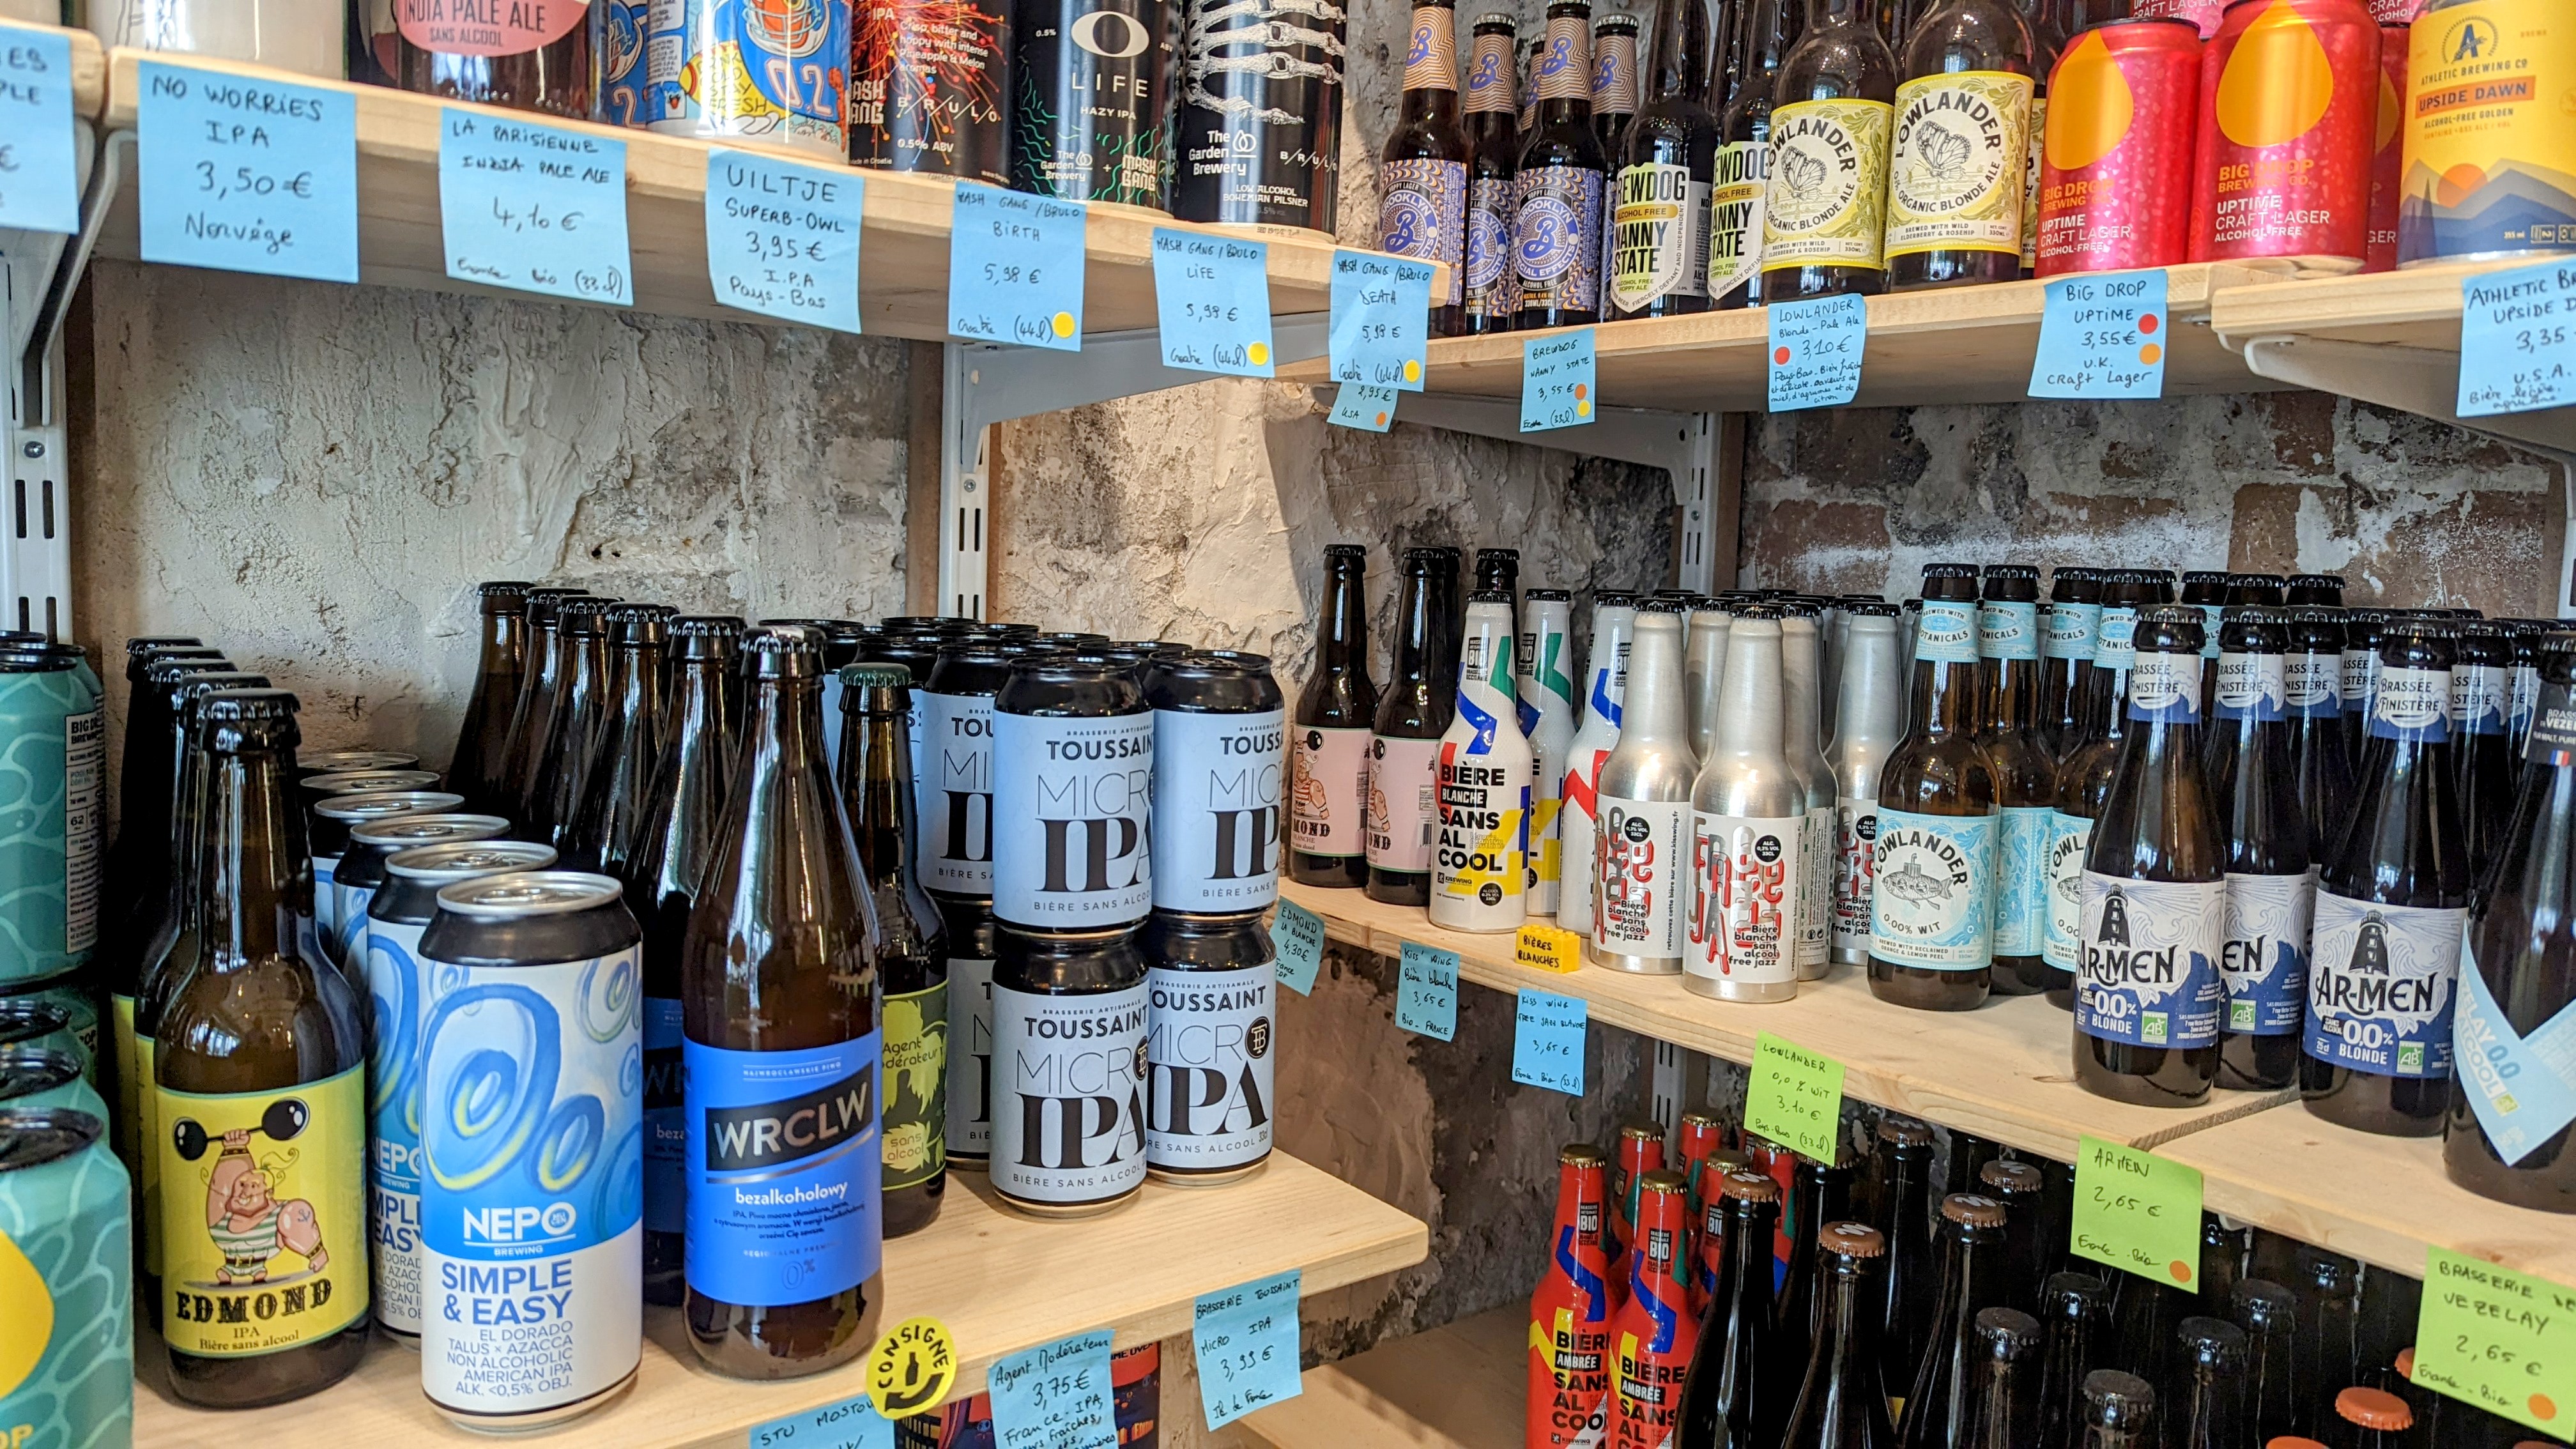 A few sample products of Paris' first alcohol-free beverages store for adults.